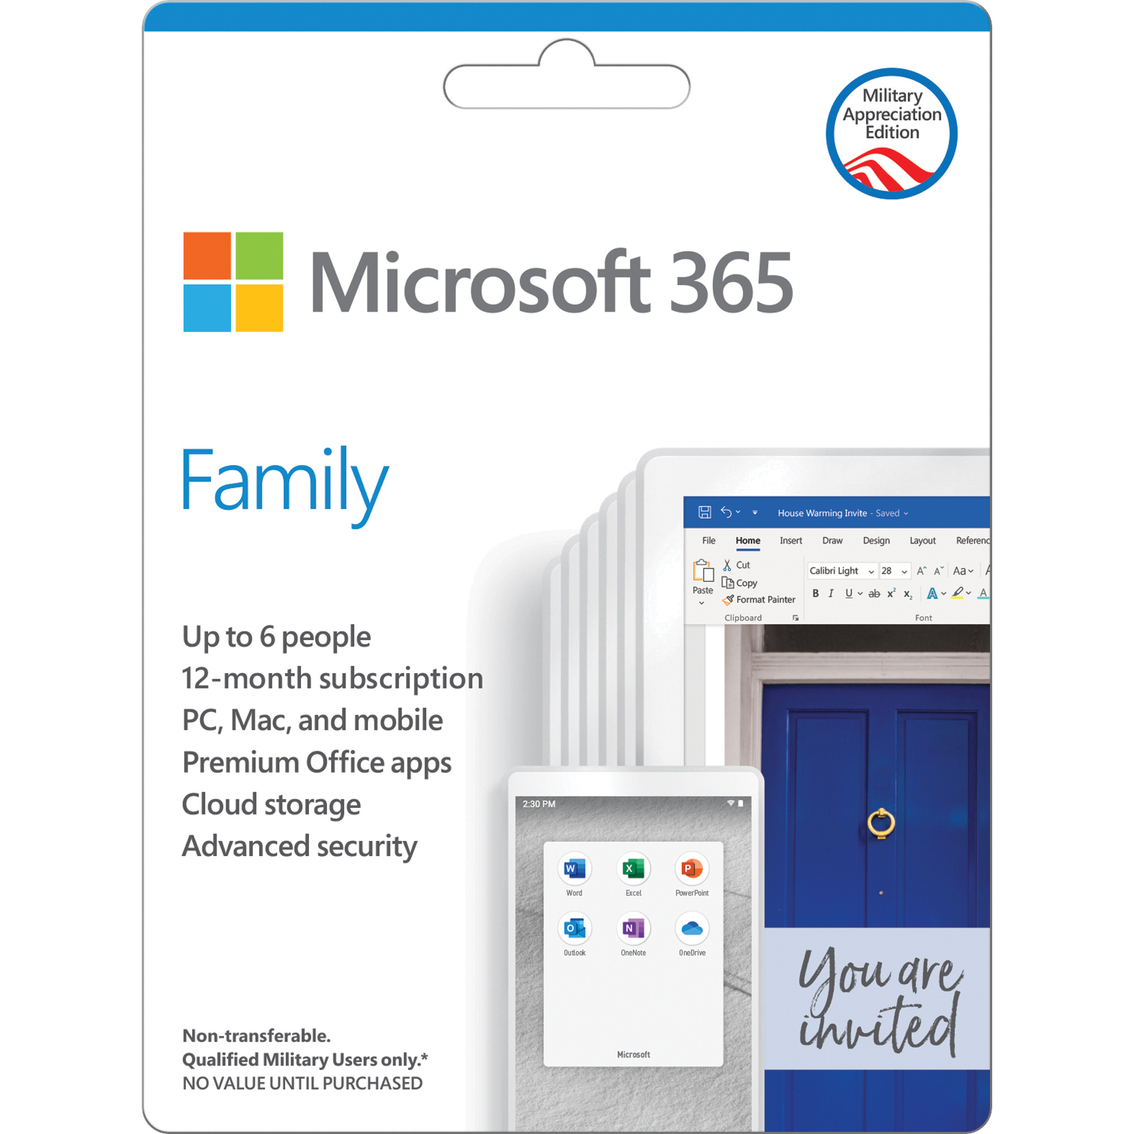 AAFES Only - Microsoft 365 Family Military Edition 2020 $49.99